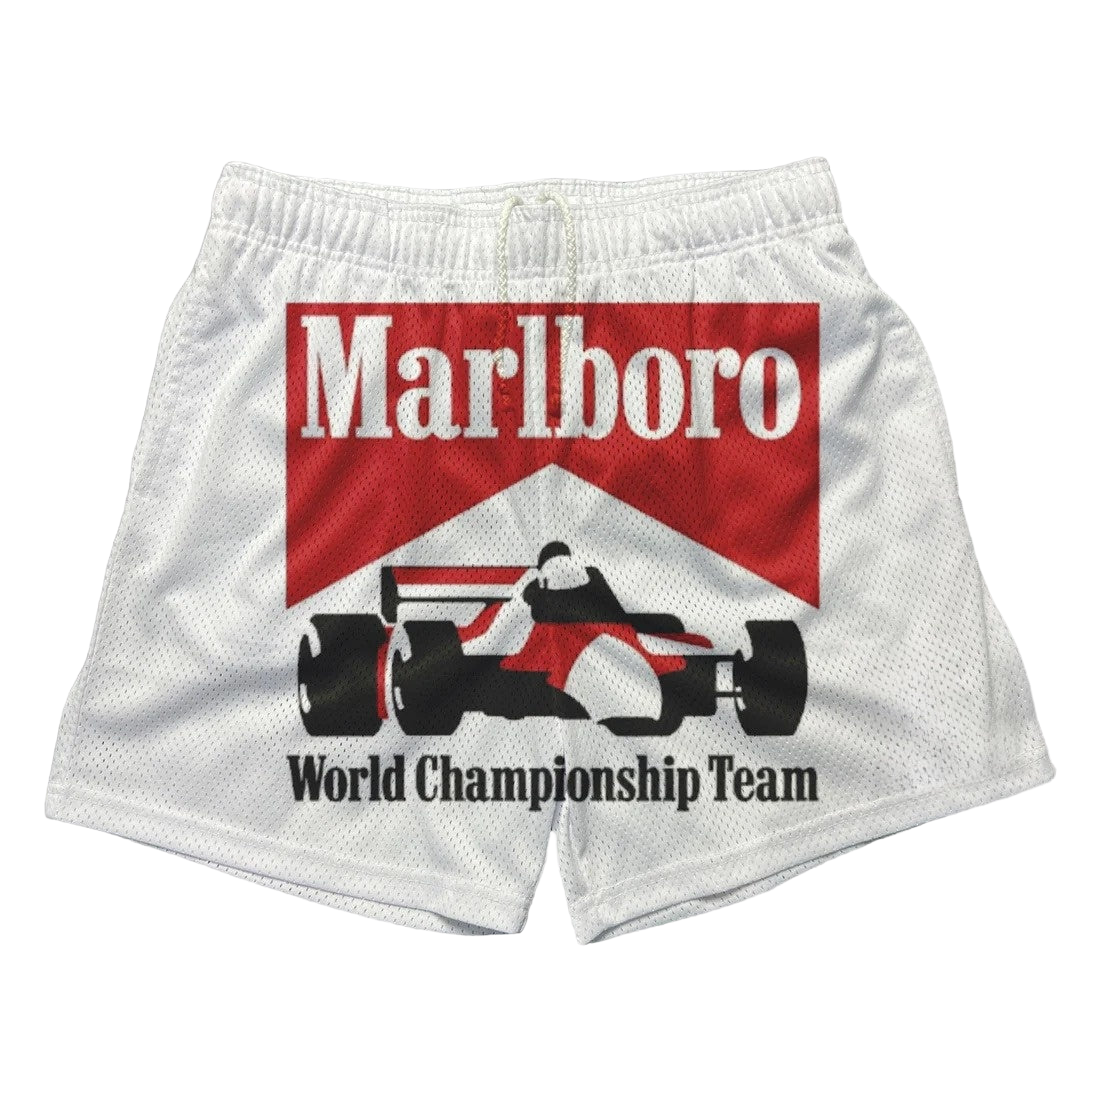 a white shorts with the words world championship team printed on it